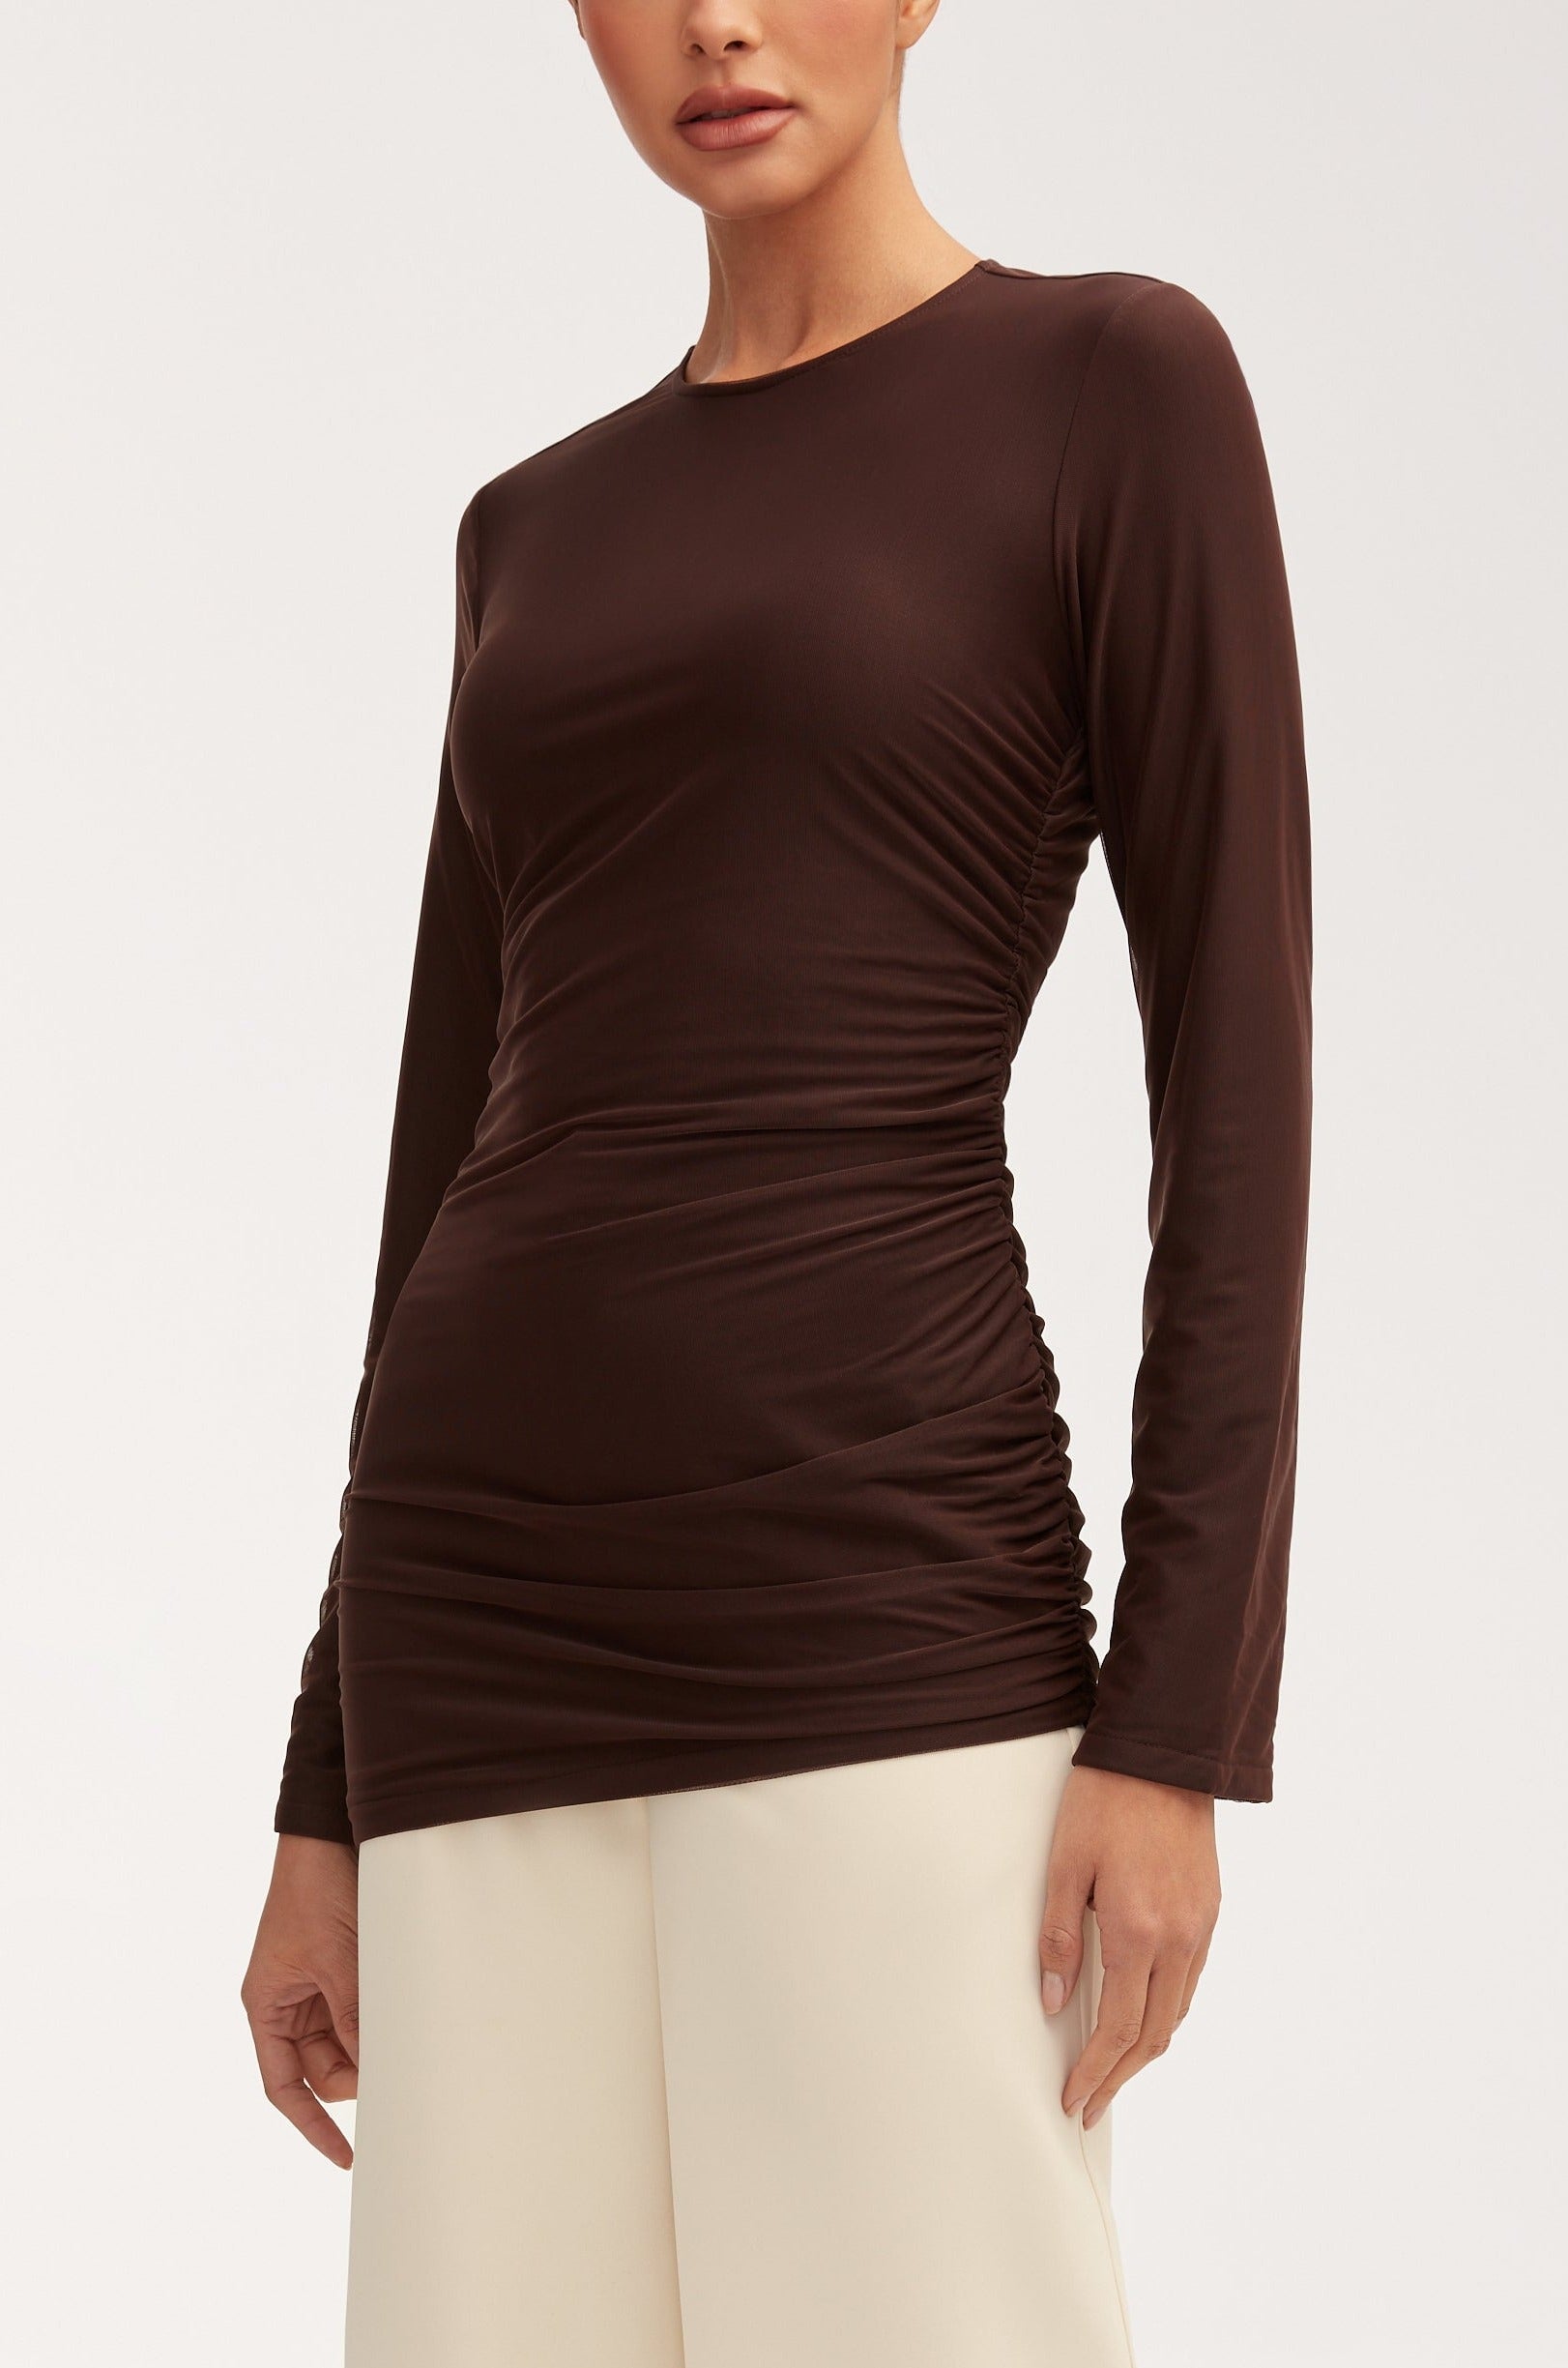 Mesh Rouched Top - Chocolate Plum Tops epschoolboard 